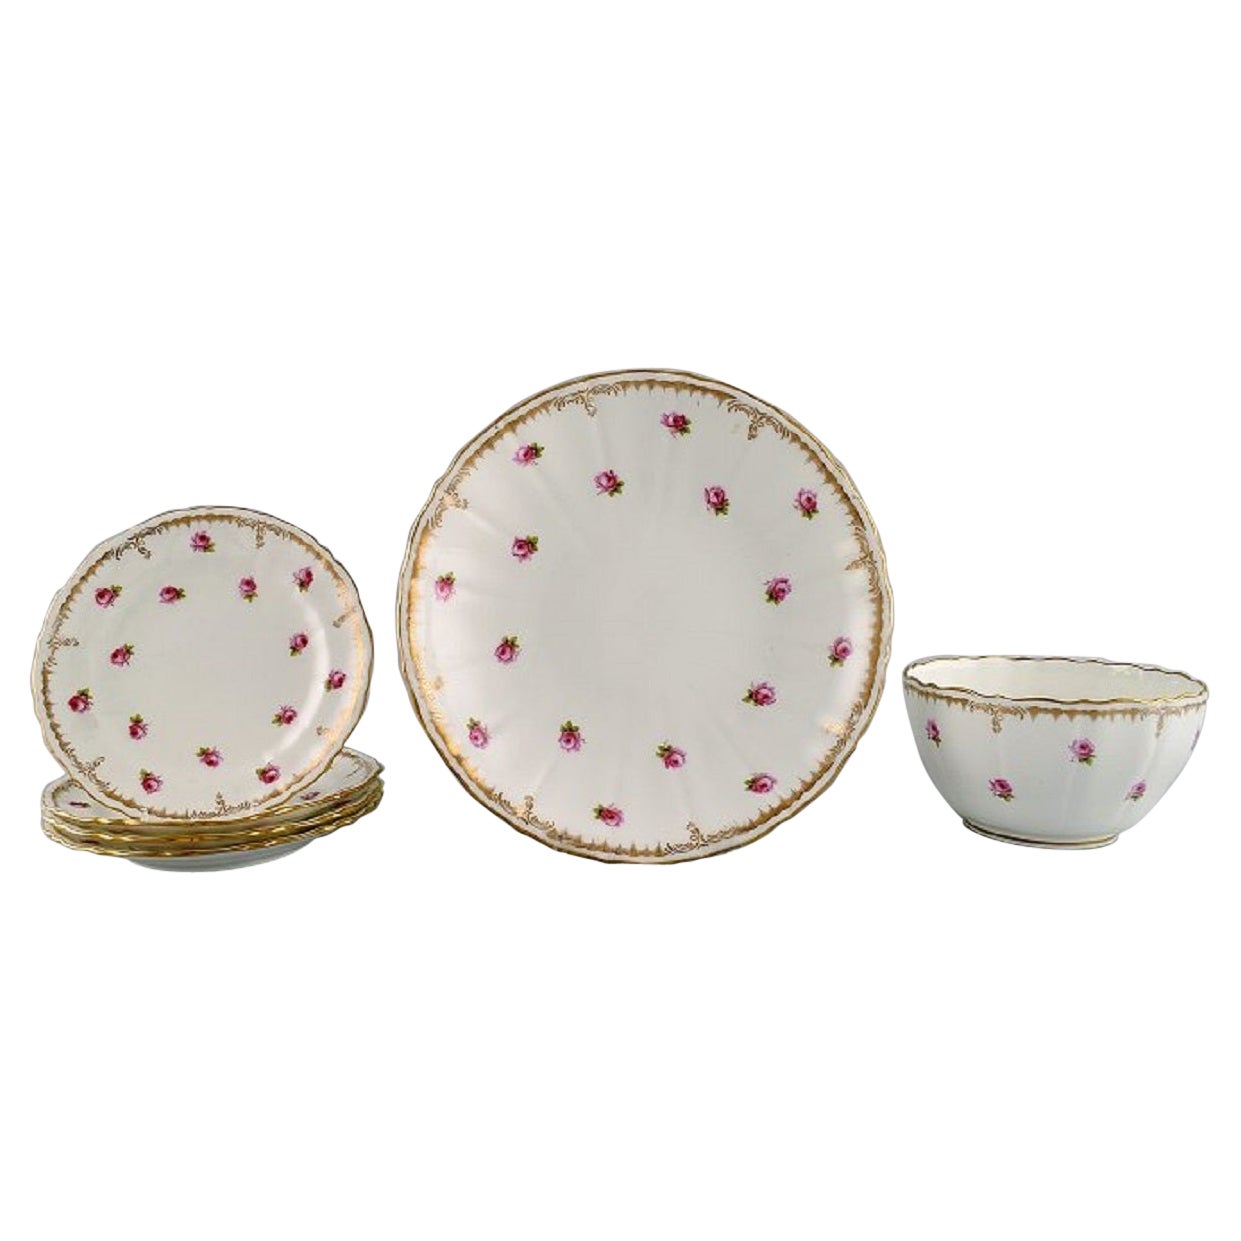 Mintons, England, Dish, Bowl and Four Plates in Hand-Painted Porcelain